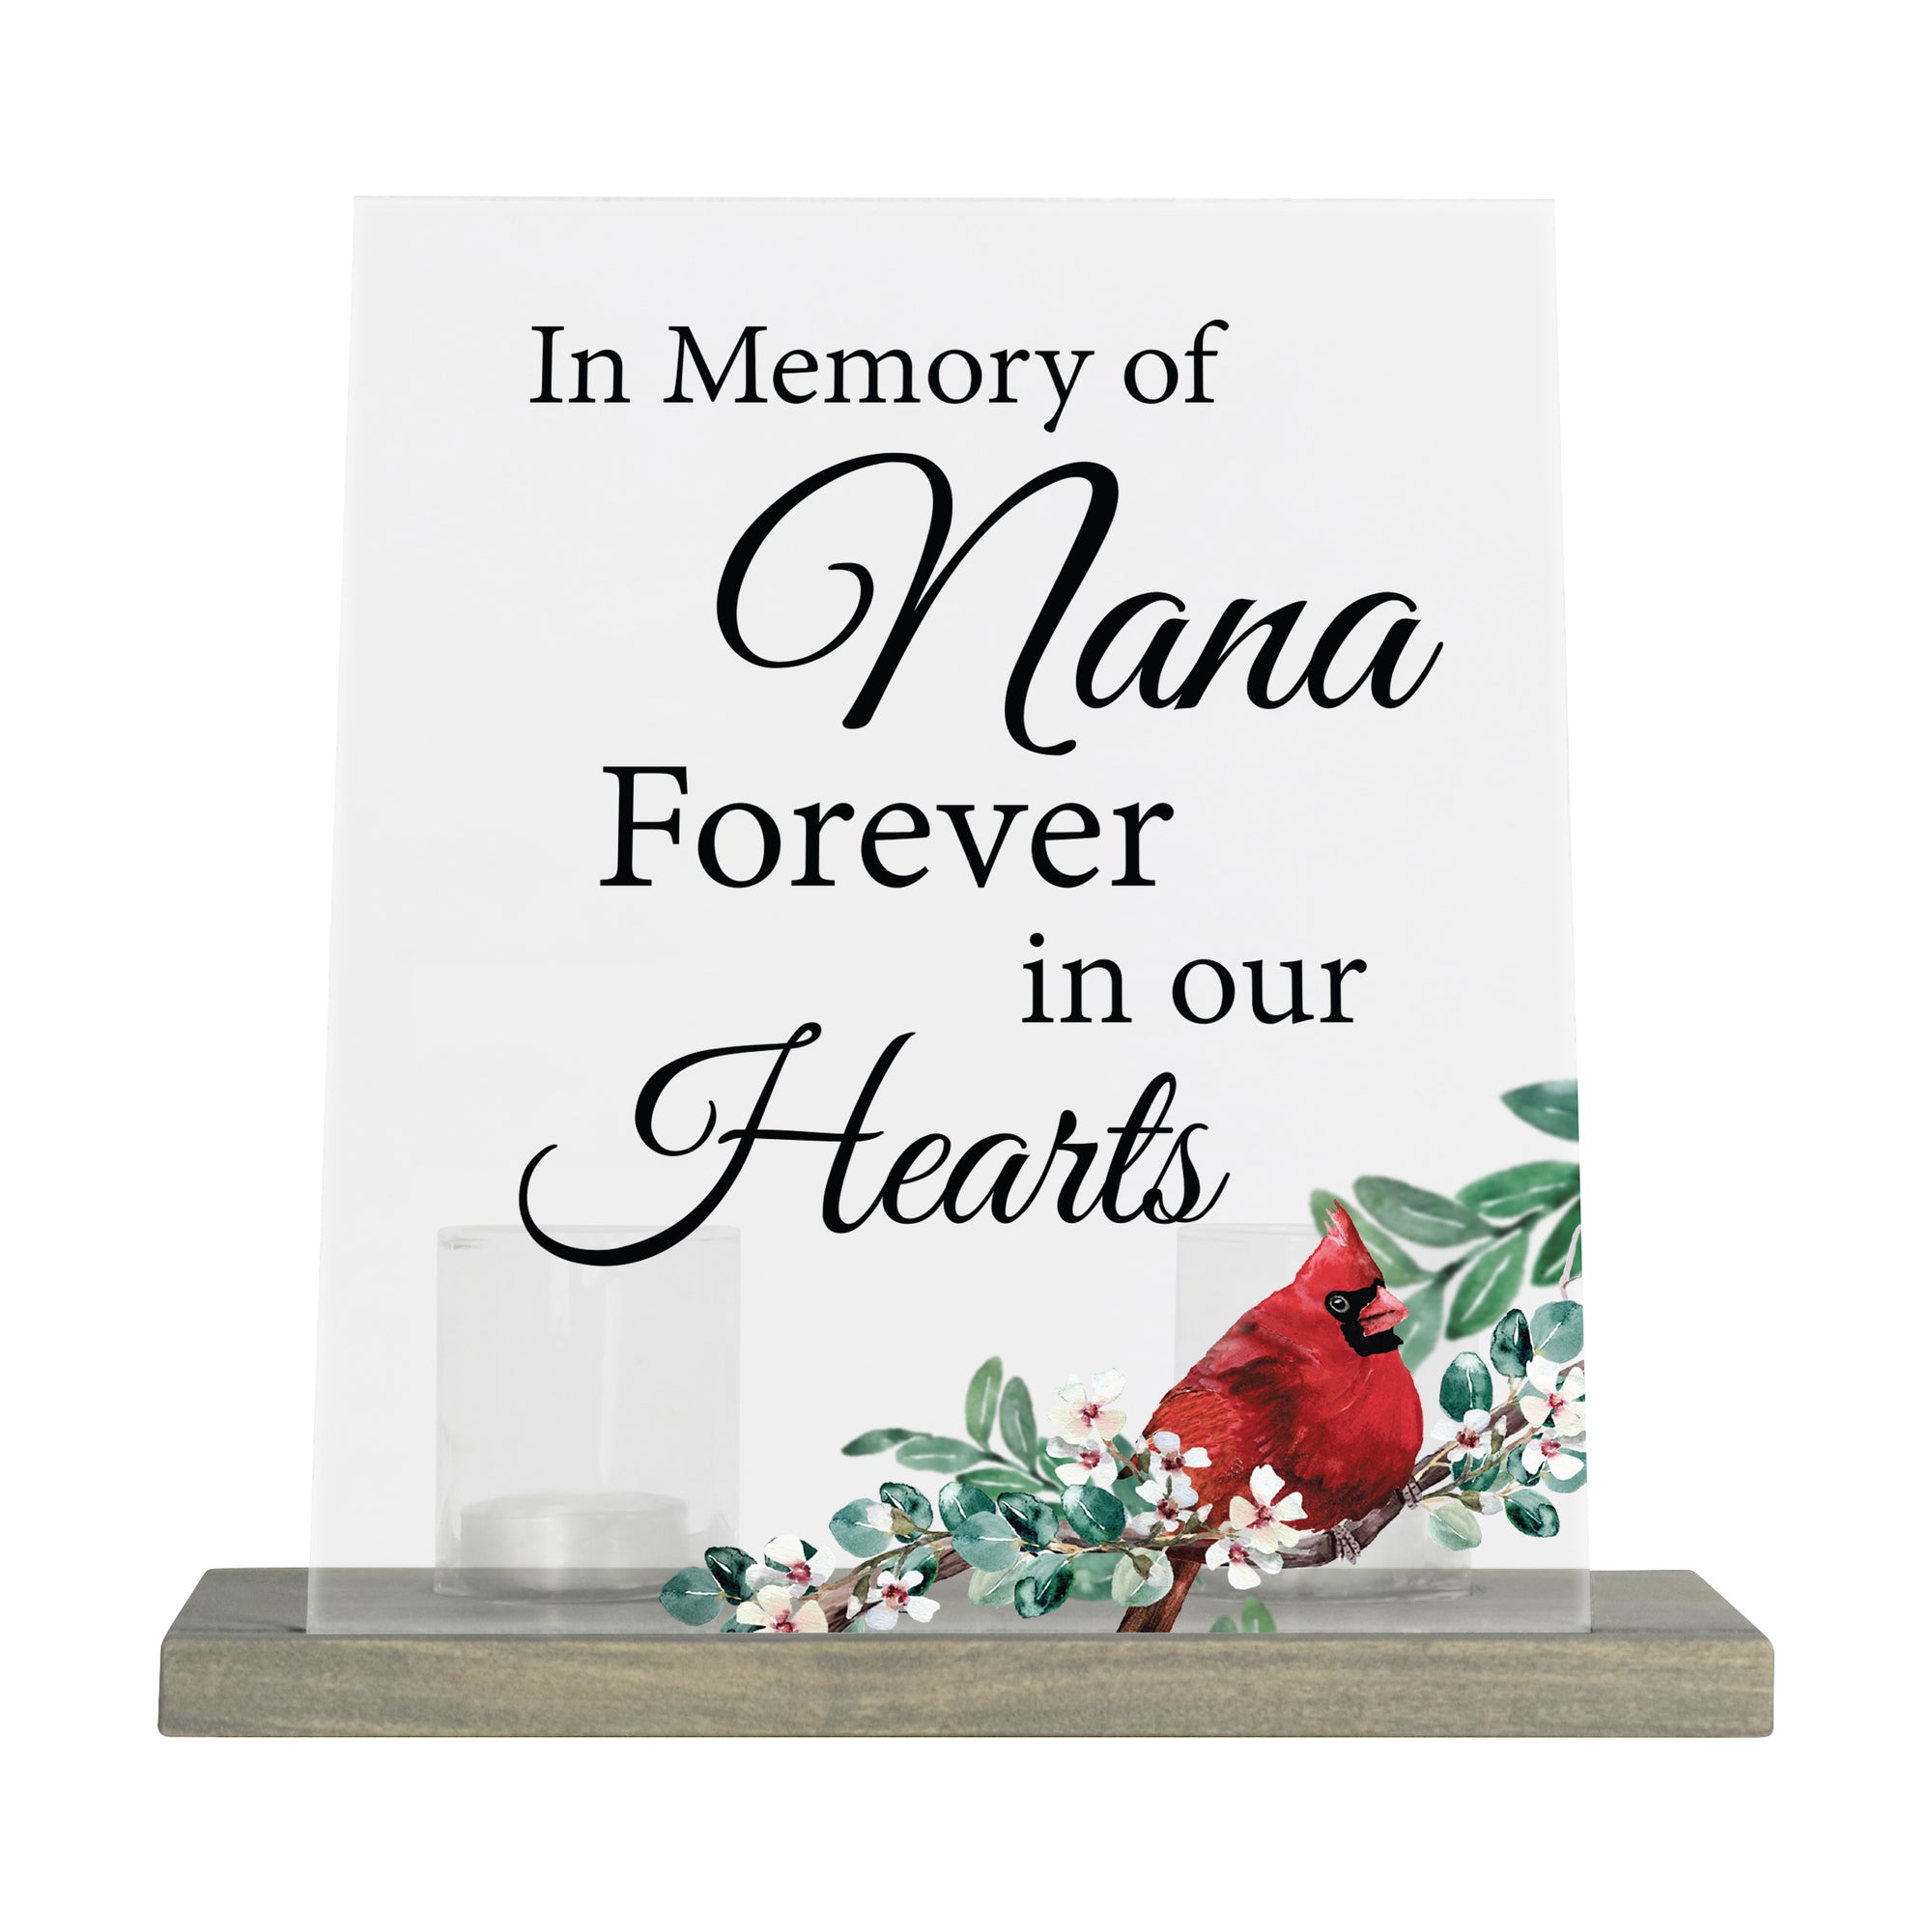 LifeSong Memorials Vintage Memorial Cardinal Acrylic Sign Candle Holder With Wood Base And Glass Votives For Home Decor | In Memory Nana. Acrylic candle holders, Vintage acrylic candle holders, glass candle holders for Living Room, Bedroom, Kitchen, Dining Room, and Entryways decor perfect memorial bereavement keepsake gift ideas for Family & Friends.